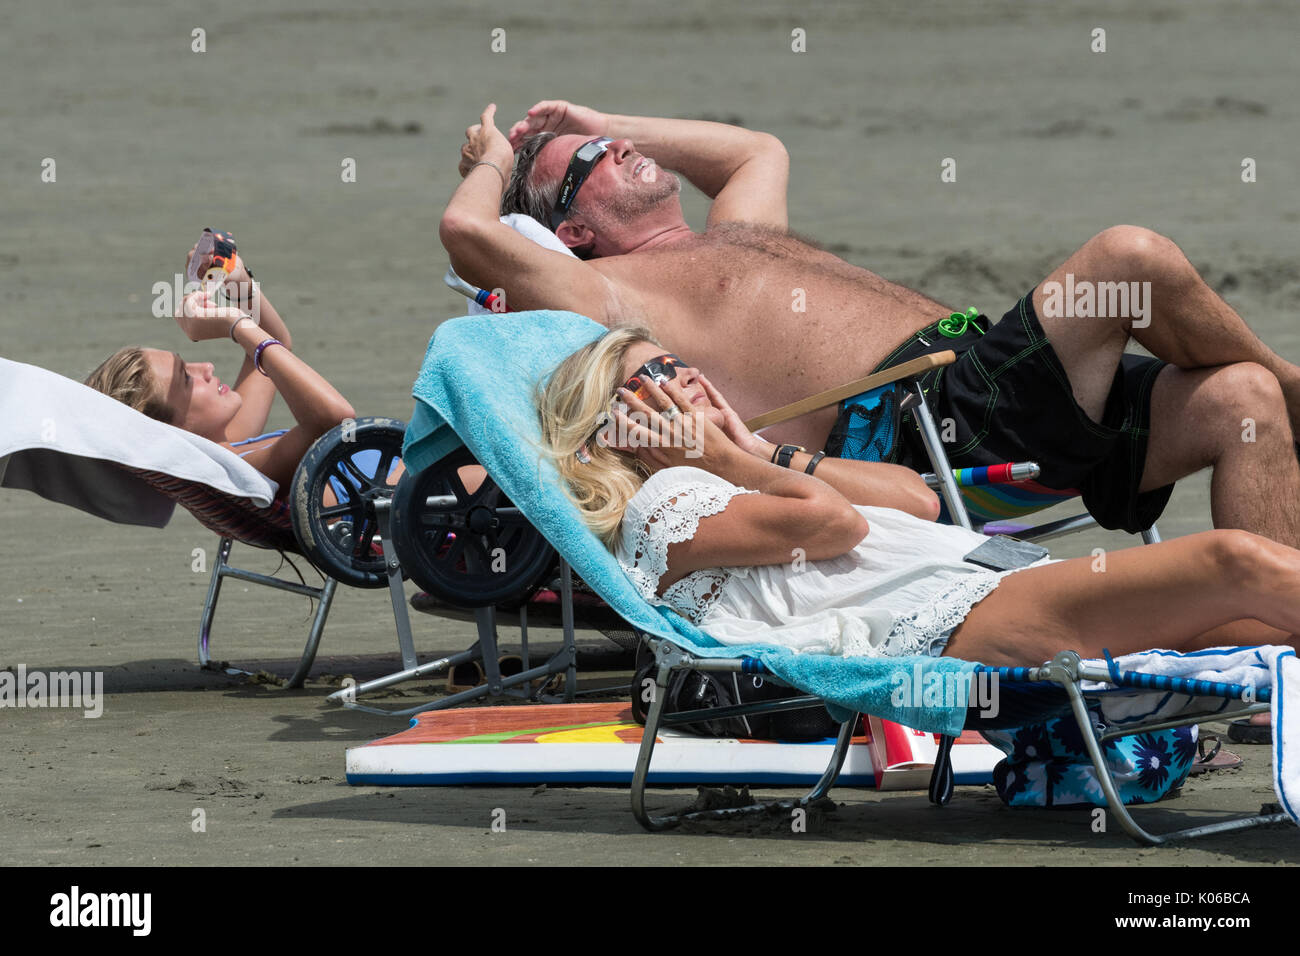 Charleston, Isle of Palms, USA. 21st Aug, 2017. A family relaxes in beach chairs as they view the total solar eclipse as it passes over the beach outside Charleston August 21, 2017 in Isle of Palms, South Carolina. The solar eclipse after sweeping across the nation crosses the Charleston area before heading over the Atlantic Ocean. Credit: Planetpix/Alamy Live News Stock Photo